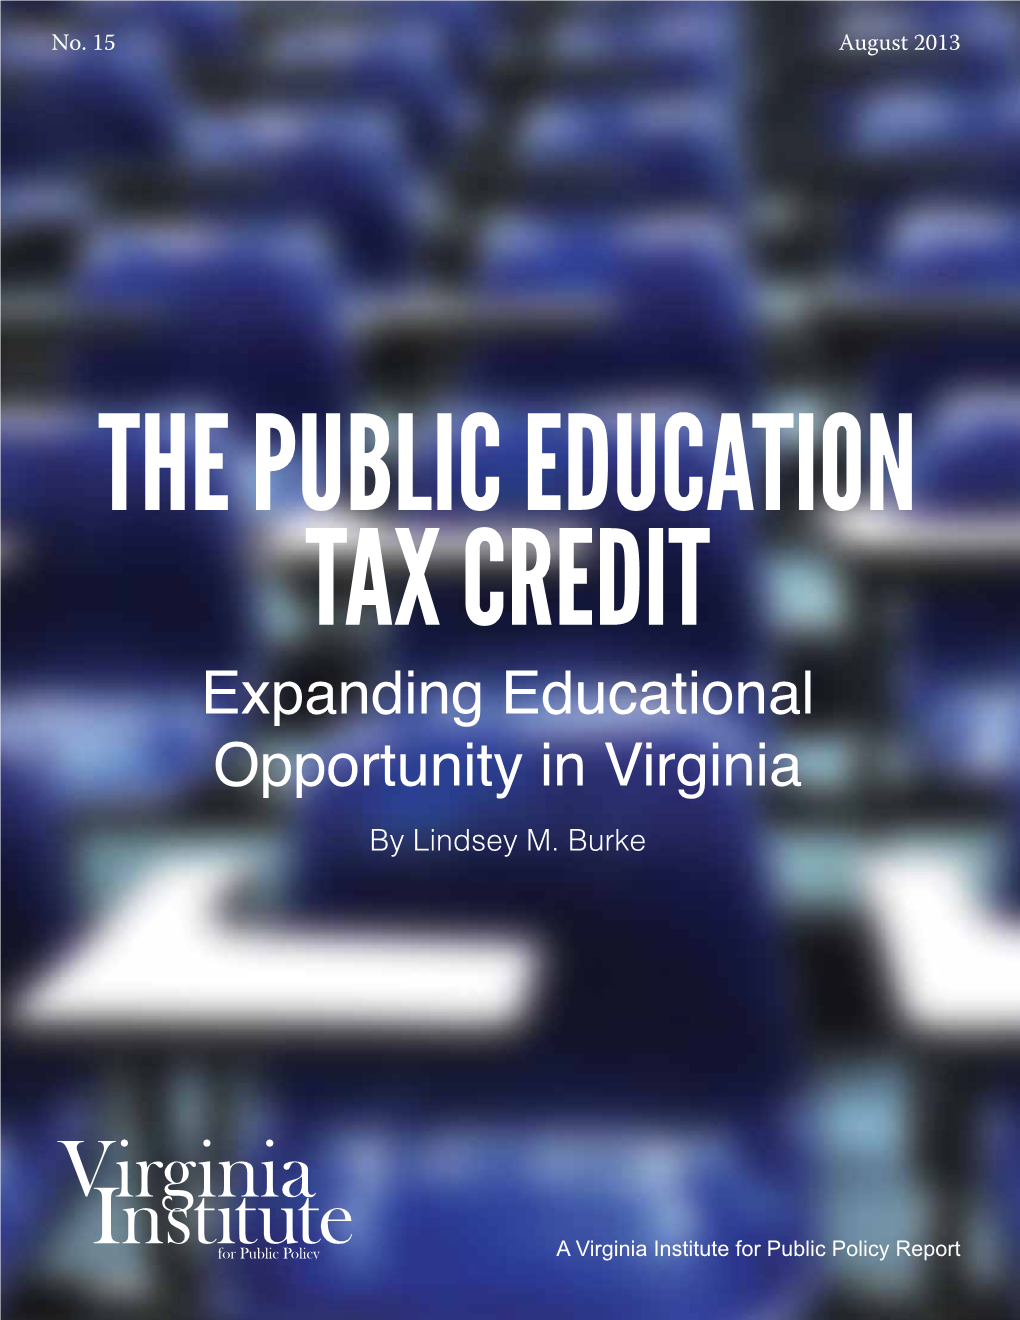 Expanding Educational Opportunity in Virginia by Lindsey M